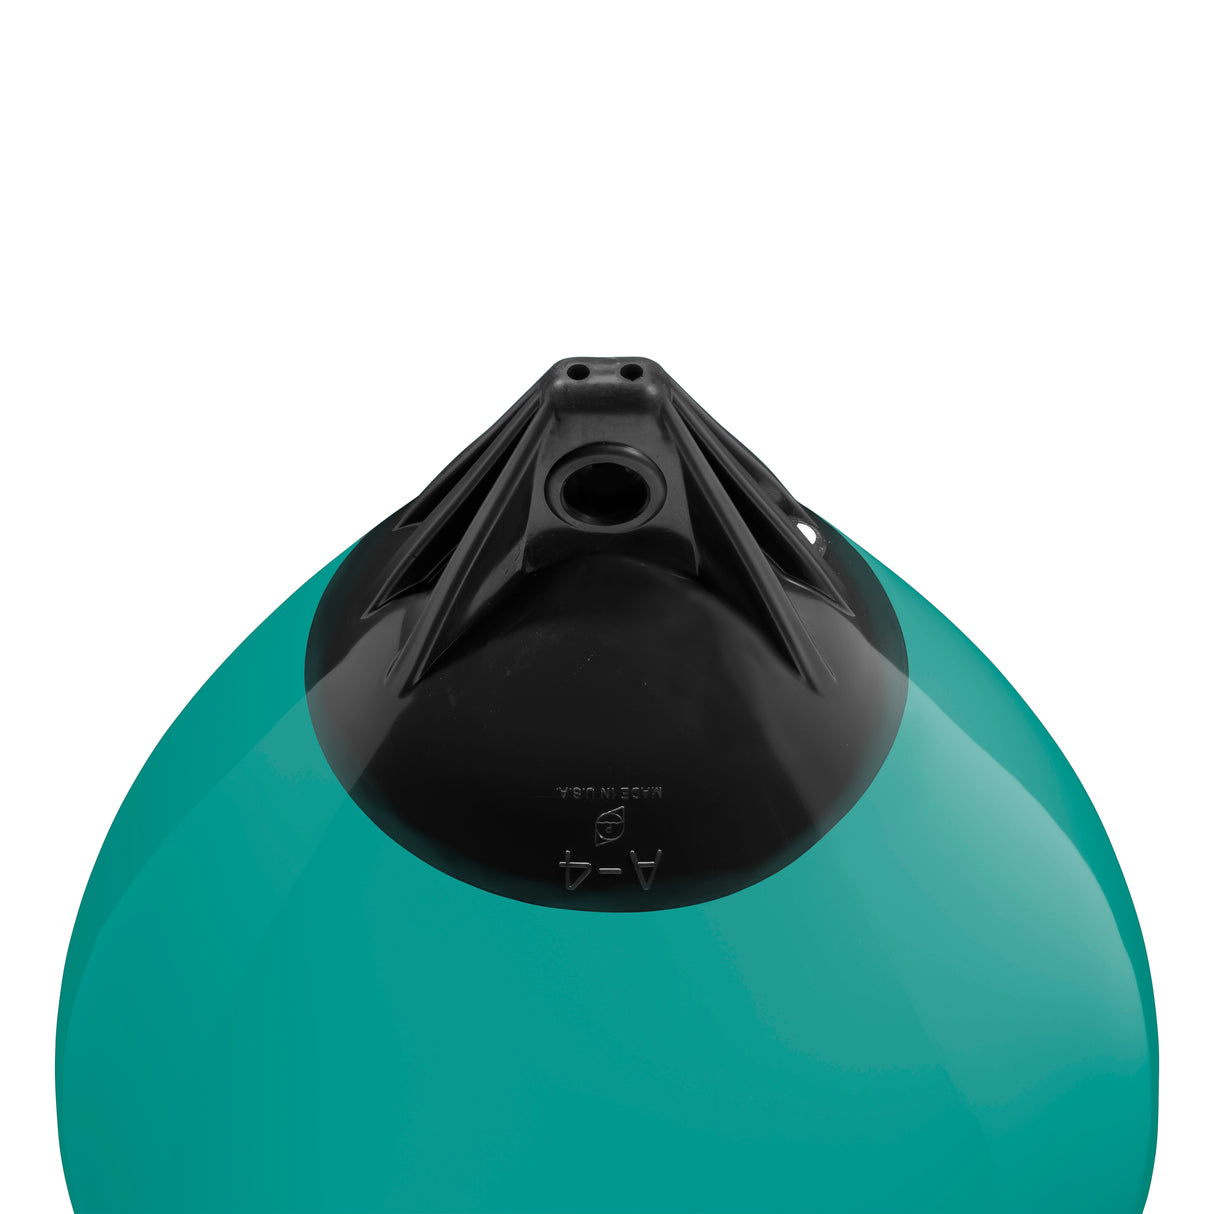 Teal buoy with Black-Top, Polyform A-4 angled shot